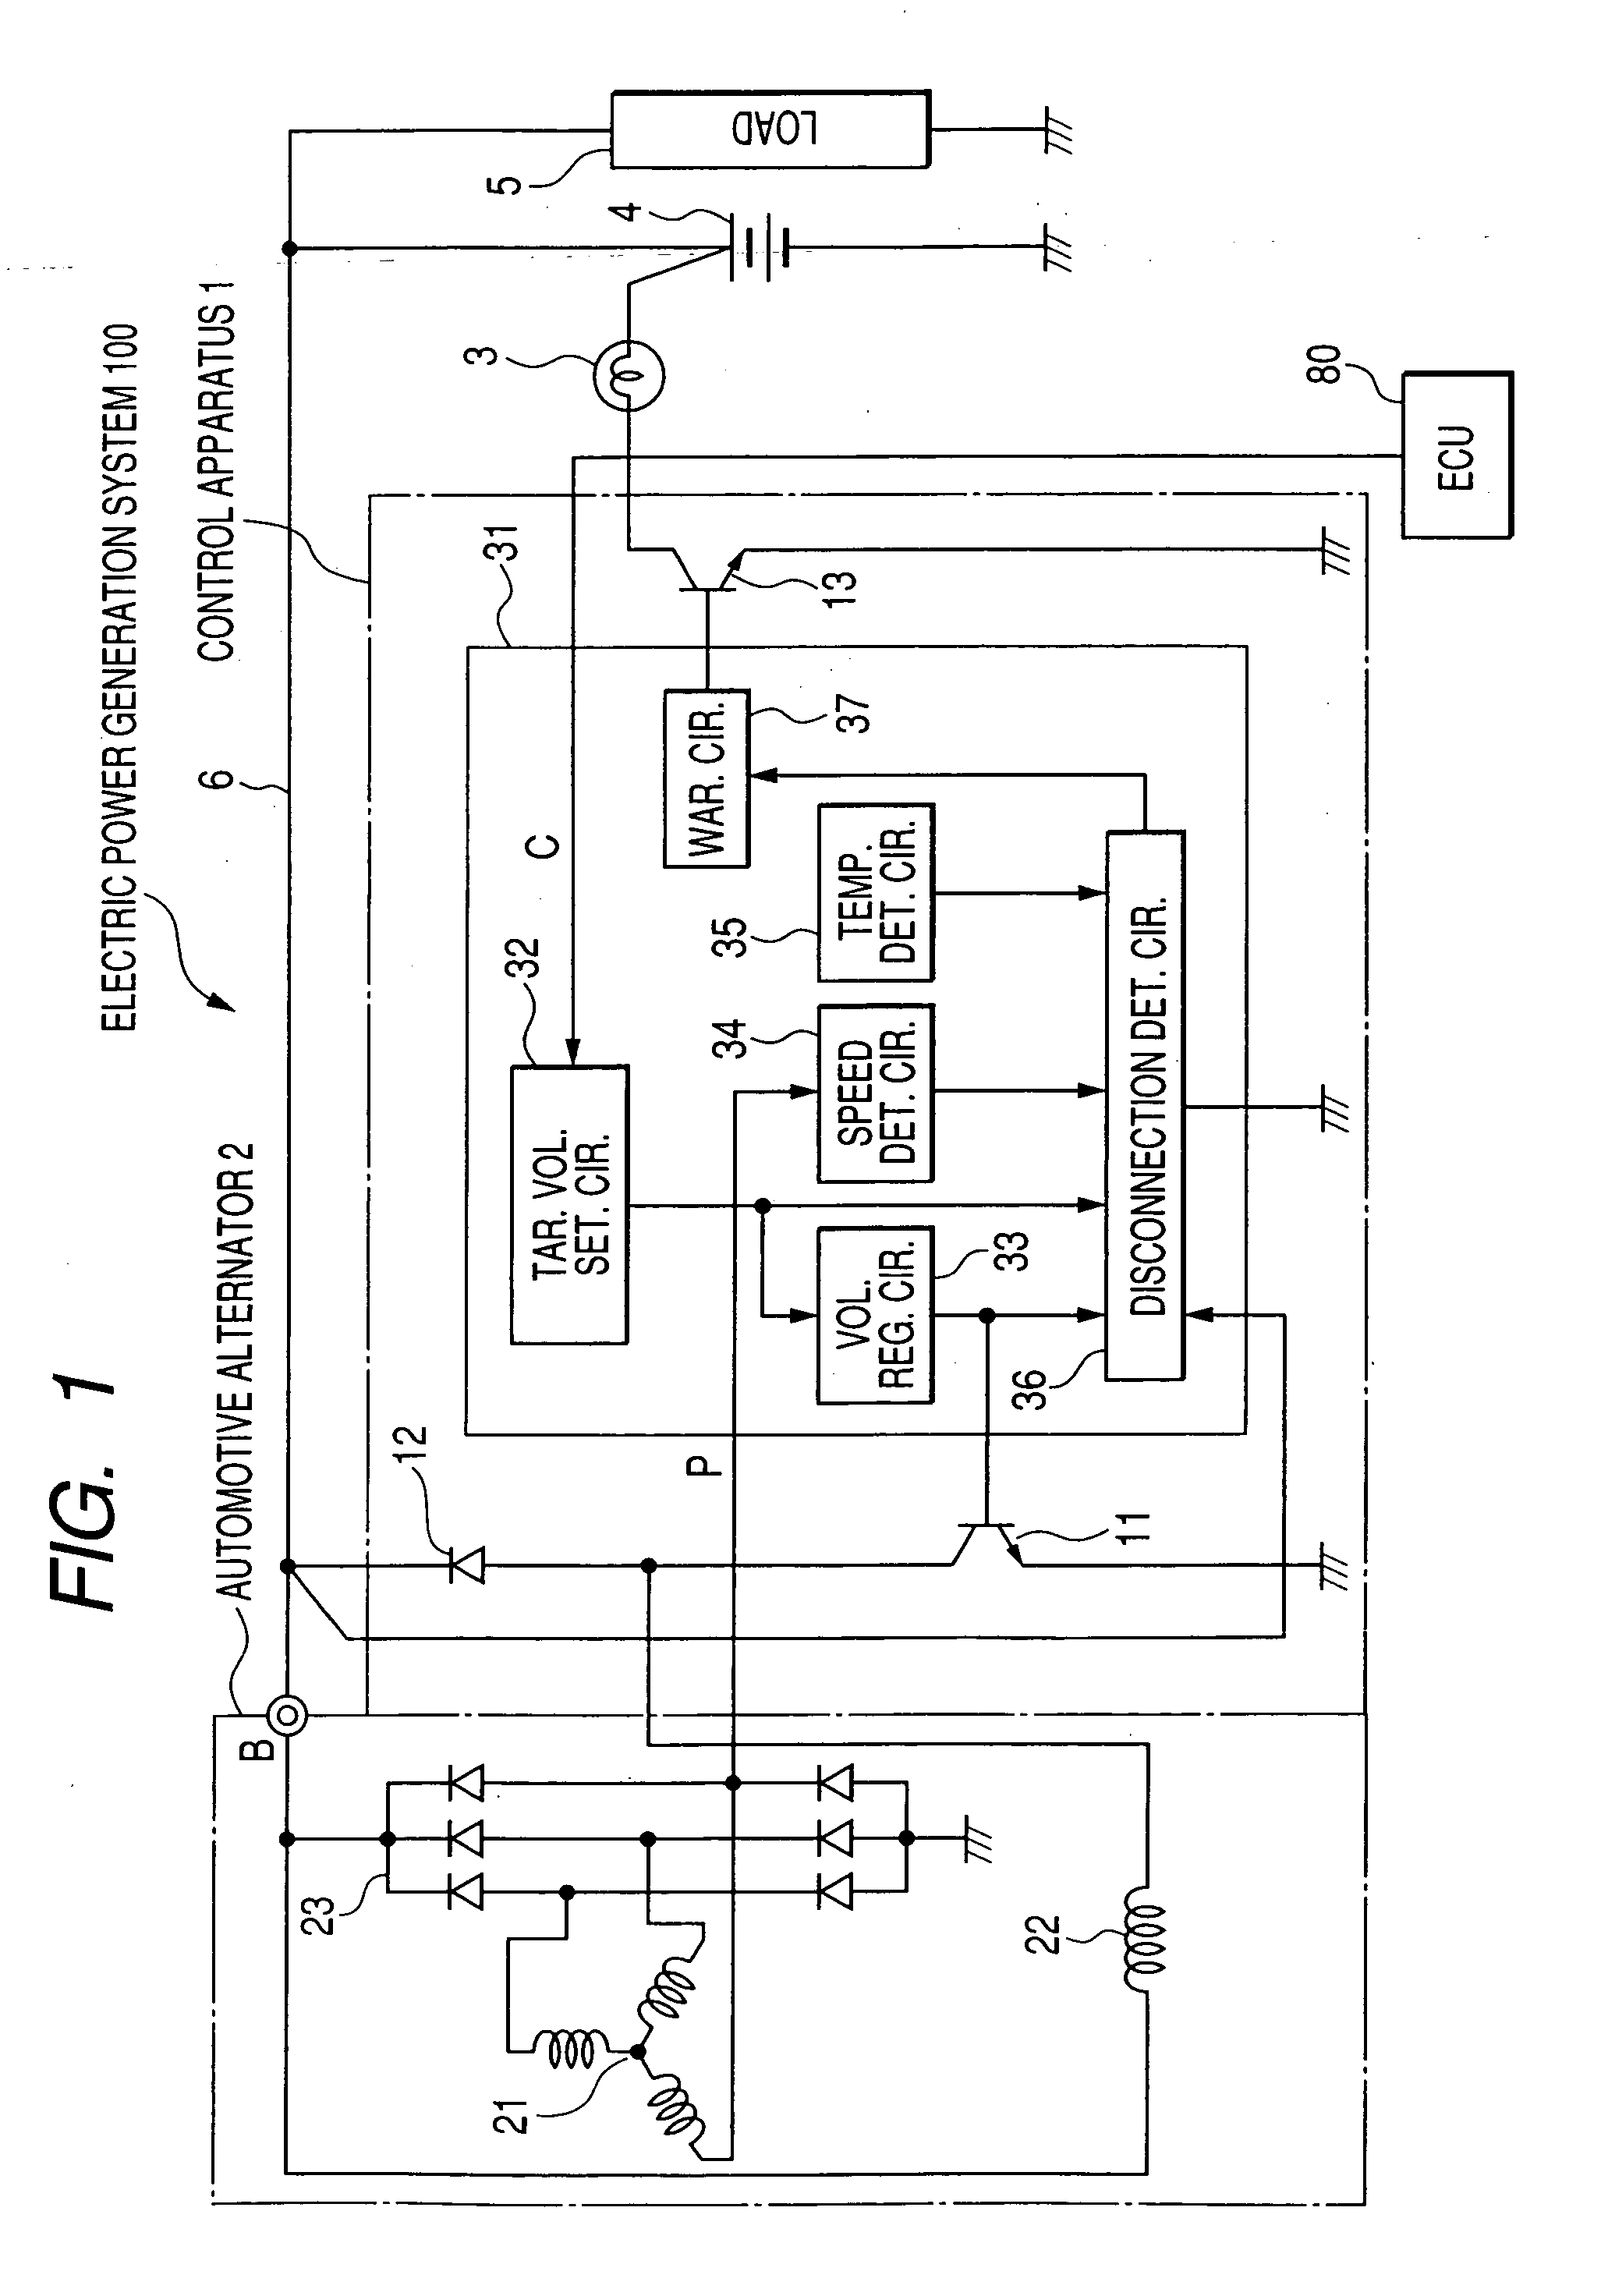 Control apparatus for automotive alternator having capability of reliably detecting disconnection between alternator and battery